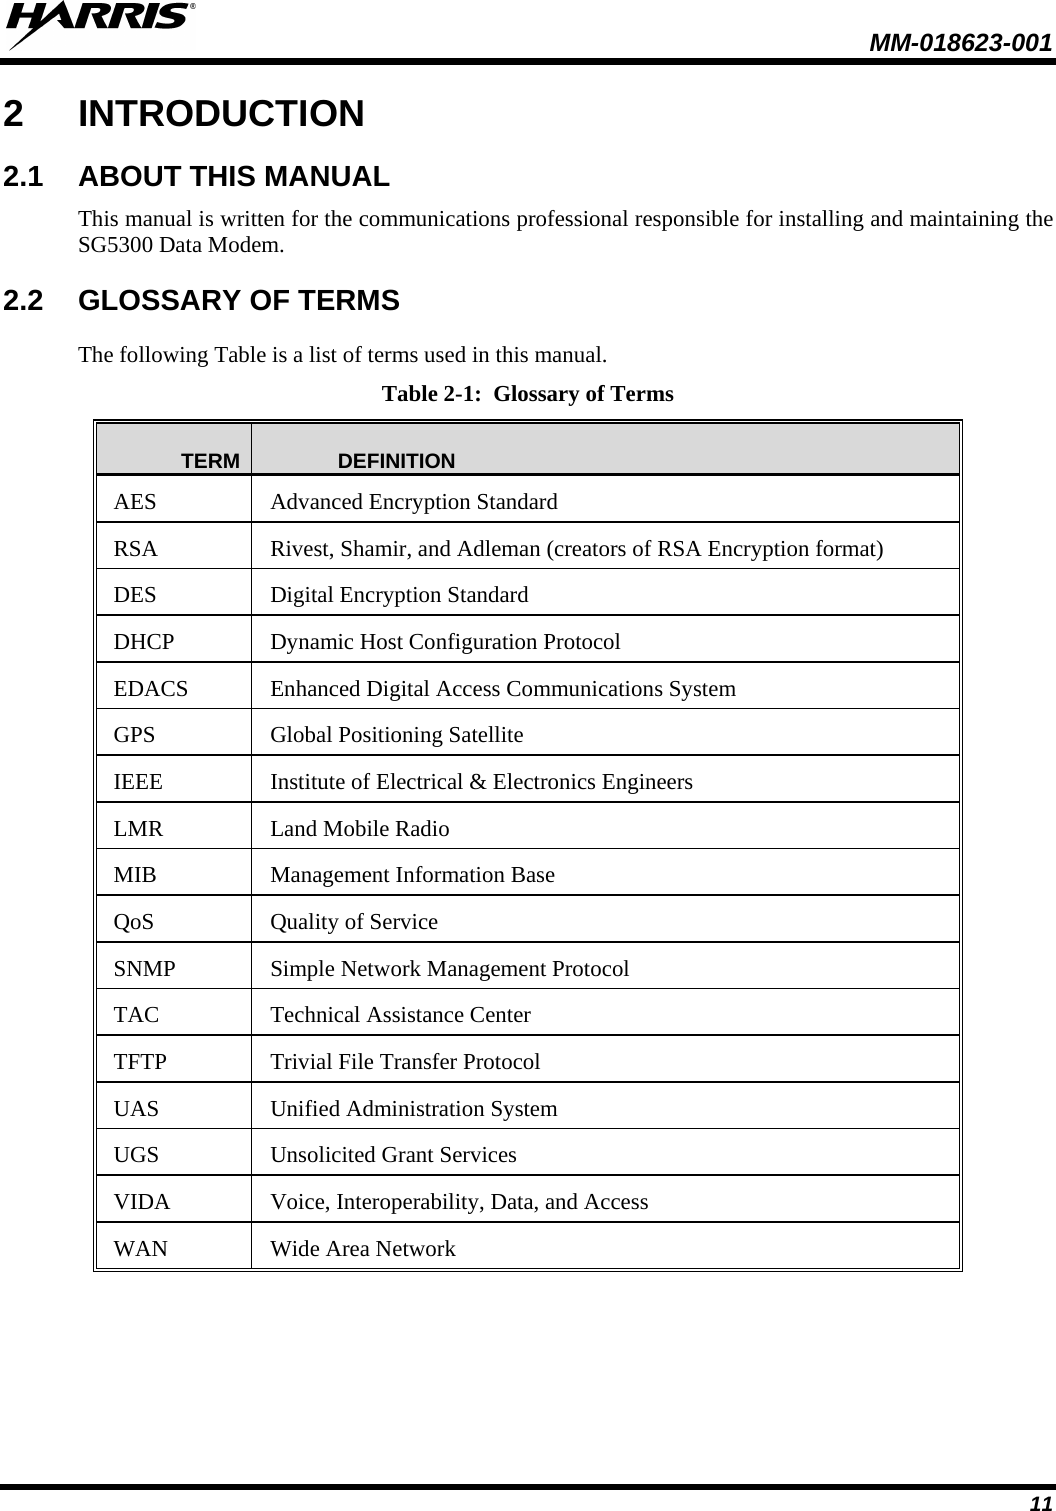  MM-018623-001  11 2  INTRODUCTION 2.1 ABOUT THIS MANUAL This manual is written for the communications professional responsible for installing and maintaining the SG5300 Data Modem. 2.2 GLOSSARY OF TERMS The following Table is a list of terms used in this manual. Table 2-1:  Glossary of Terms TERM DEFINITION AES Advanced Encryption Standard RSA  Rivest, Shamir, and Adleman (creators of RSA Encryption format) DES Digital Encryption Standard DHCP Dynamic Host Configuration Protocol EDACS  Enhanced Digital Access Communications System GPS Global Positioning Satellite IEEE Institute of Electrical &amp; Electronics Engineers LMR Land Mobile Radio MIB  Management Information Base QoS Quality of Service SNMP Simple Network Management Protocol TAC Technical Assistance Center TFTP Trivial File Transfer Protocol UAS Unified Administration System UGS Unsolicited Grant Services VIDA Voice, Interoperability, Data, and Access WAN Wide Area Network 